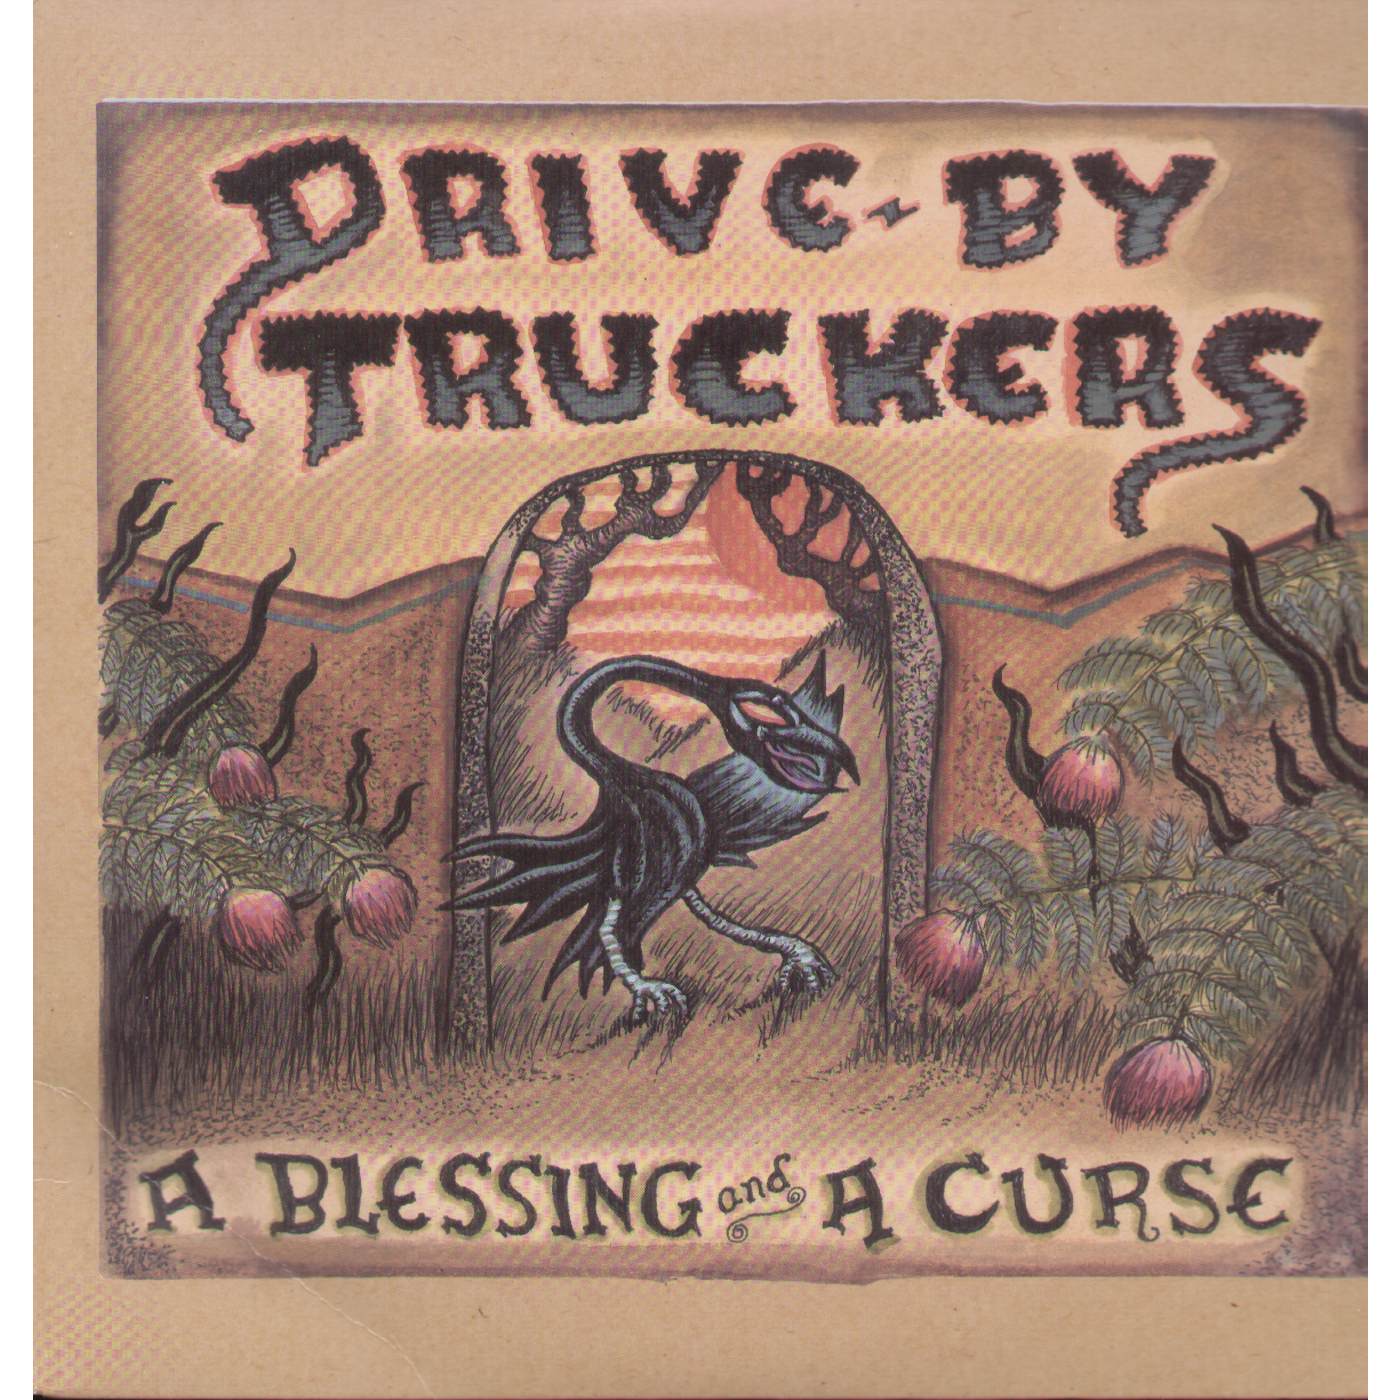 Drive-By Truckers BLESSING AND A CURSE Vinyl Record